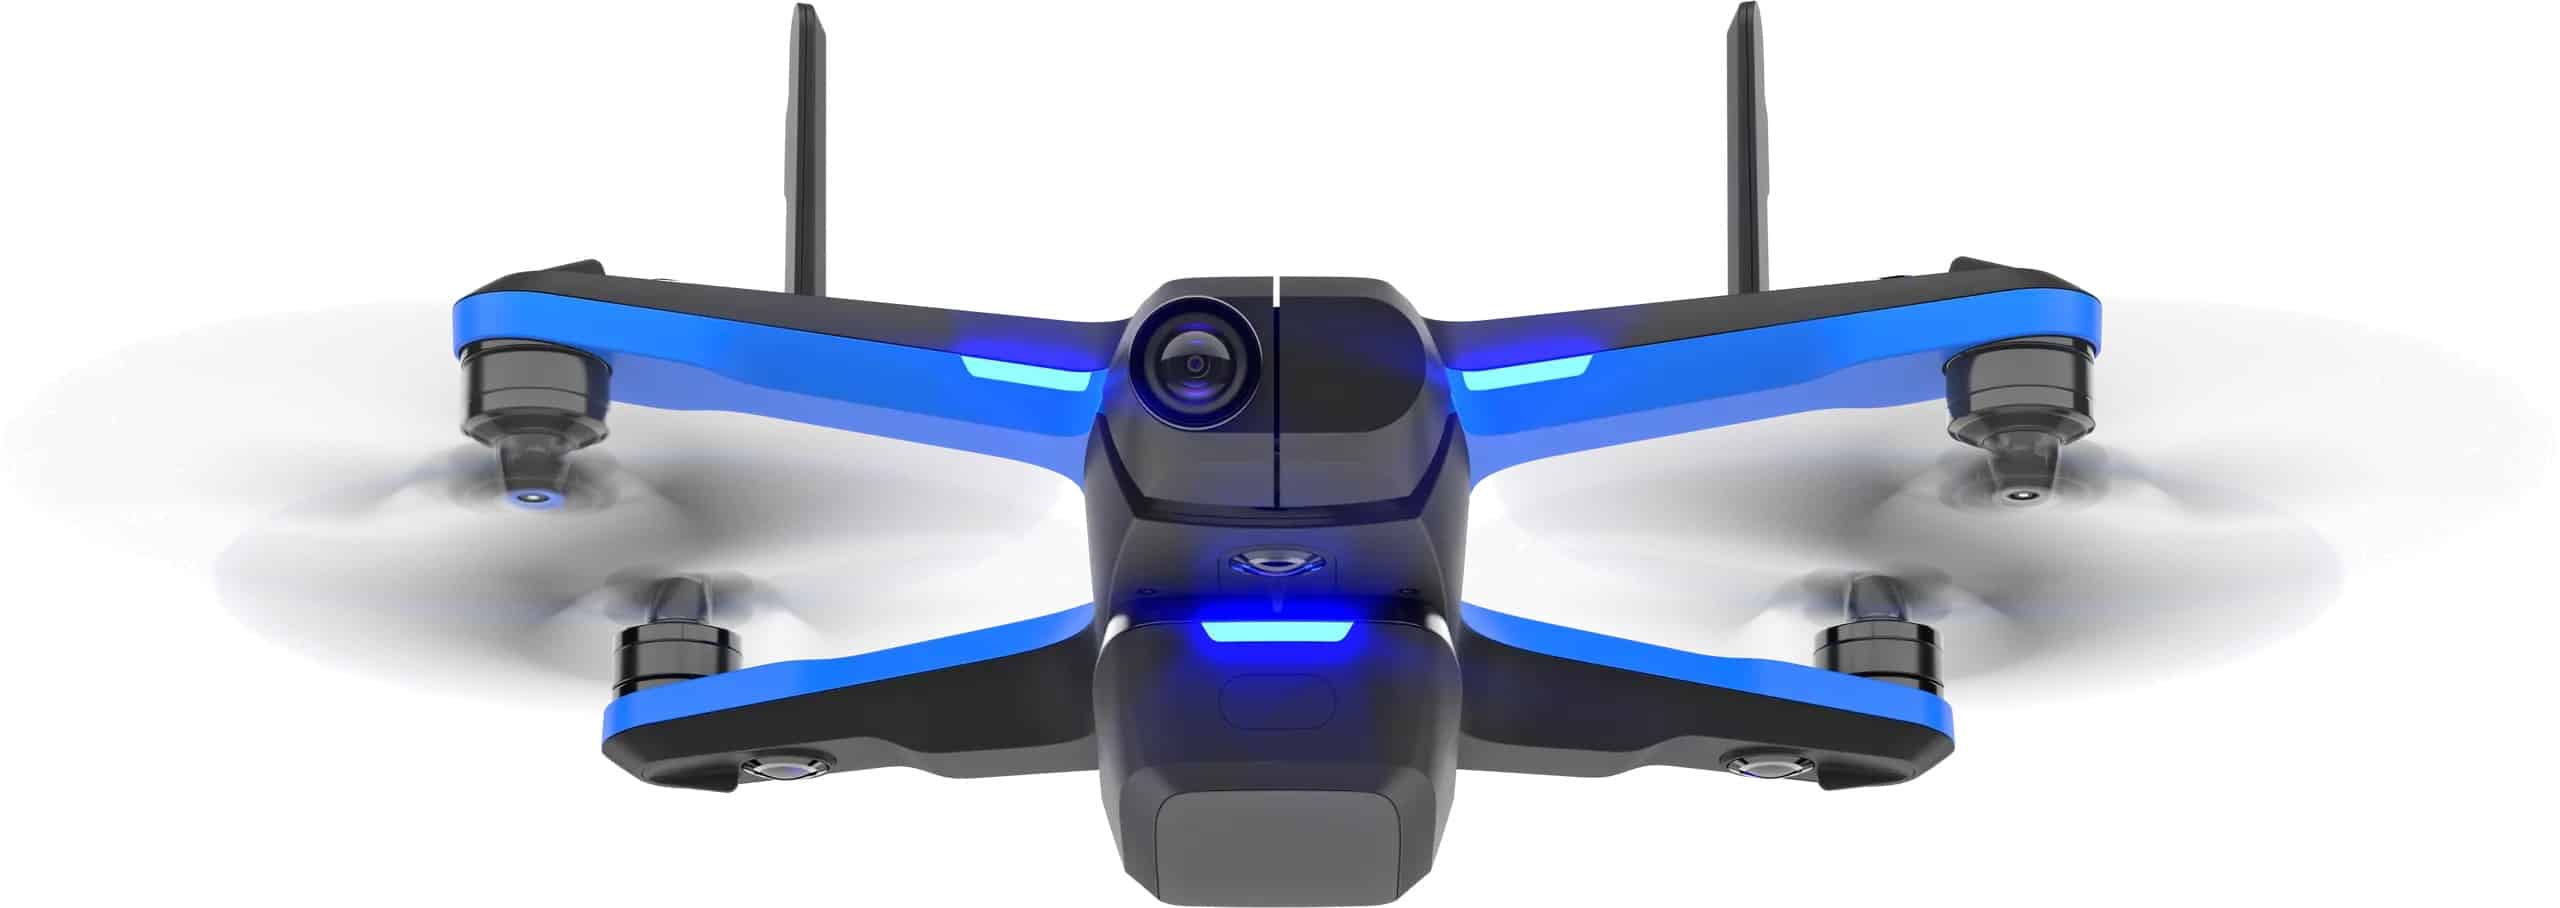 skydio 2 top drone with a camera